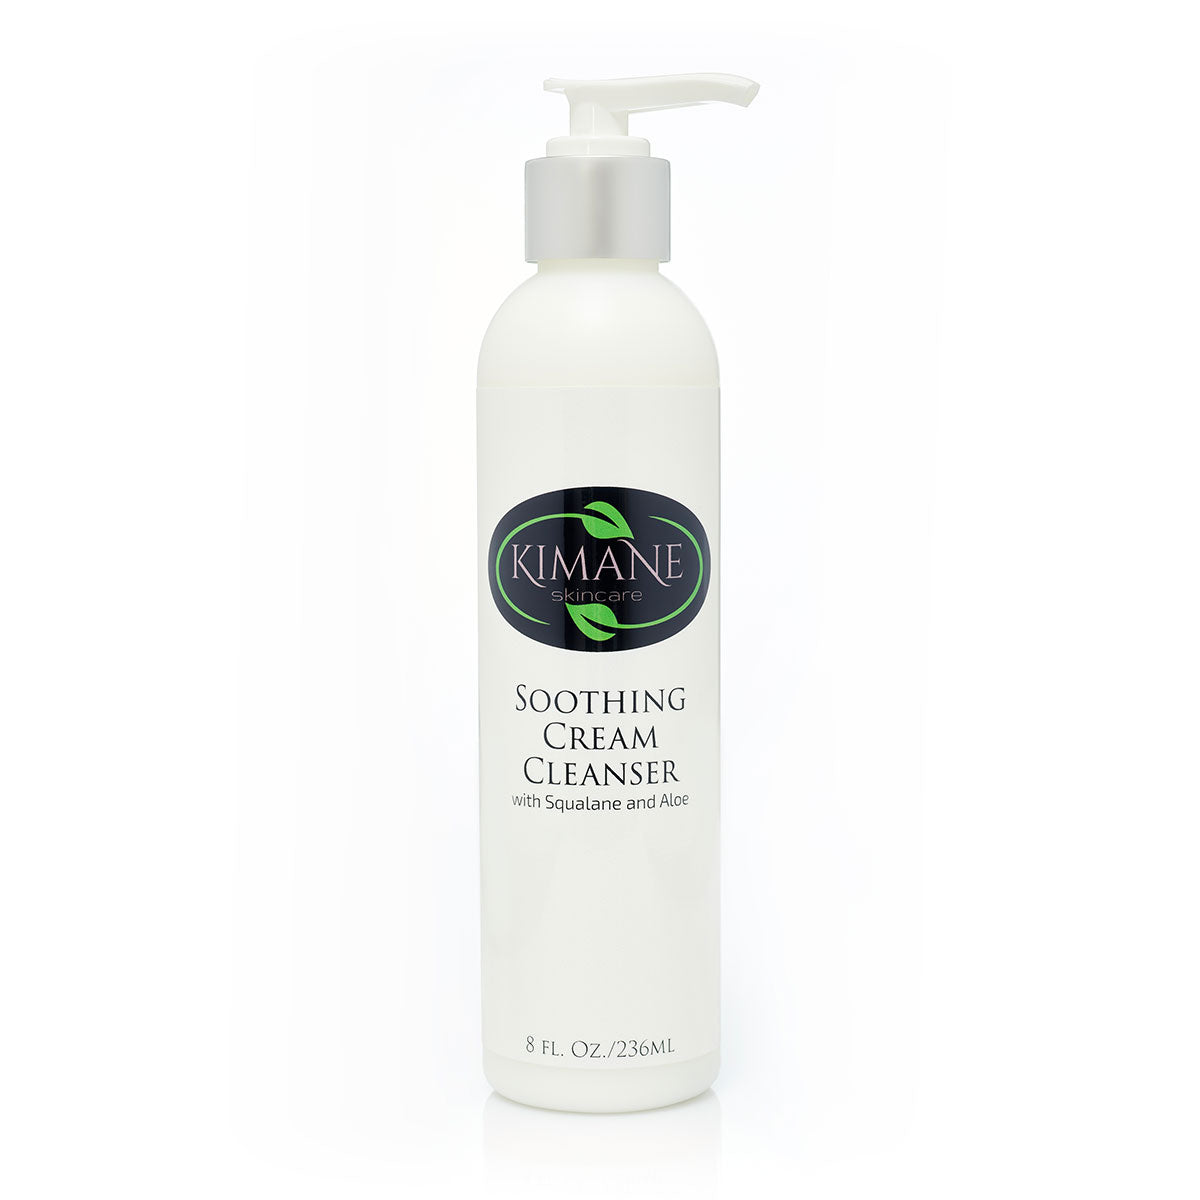 Soothing Cream Cleanser with Squalane and Aloe